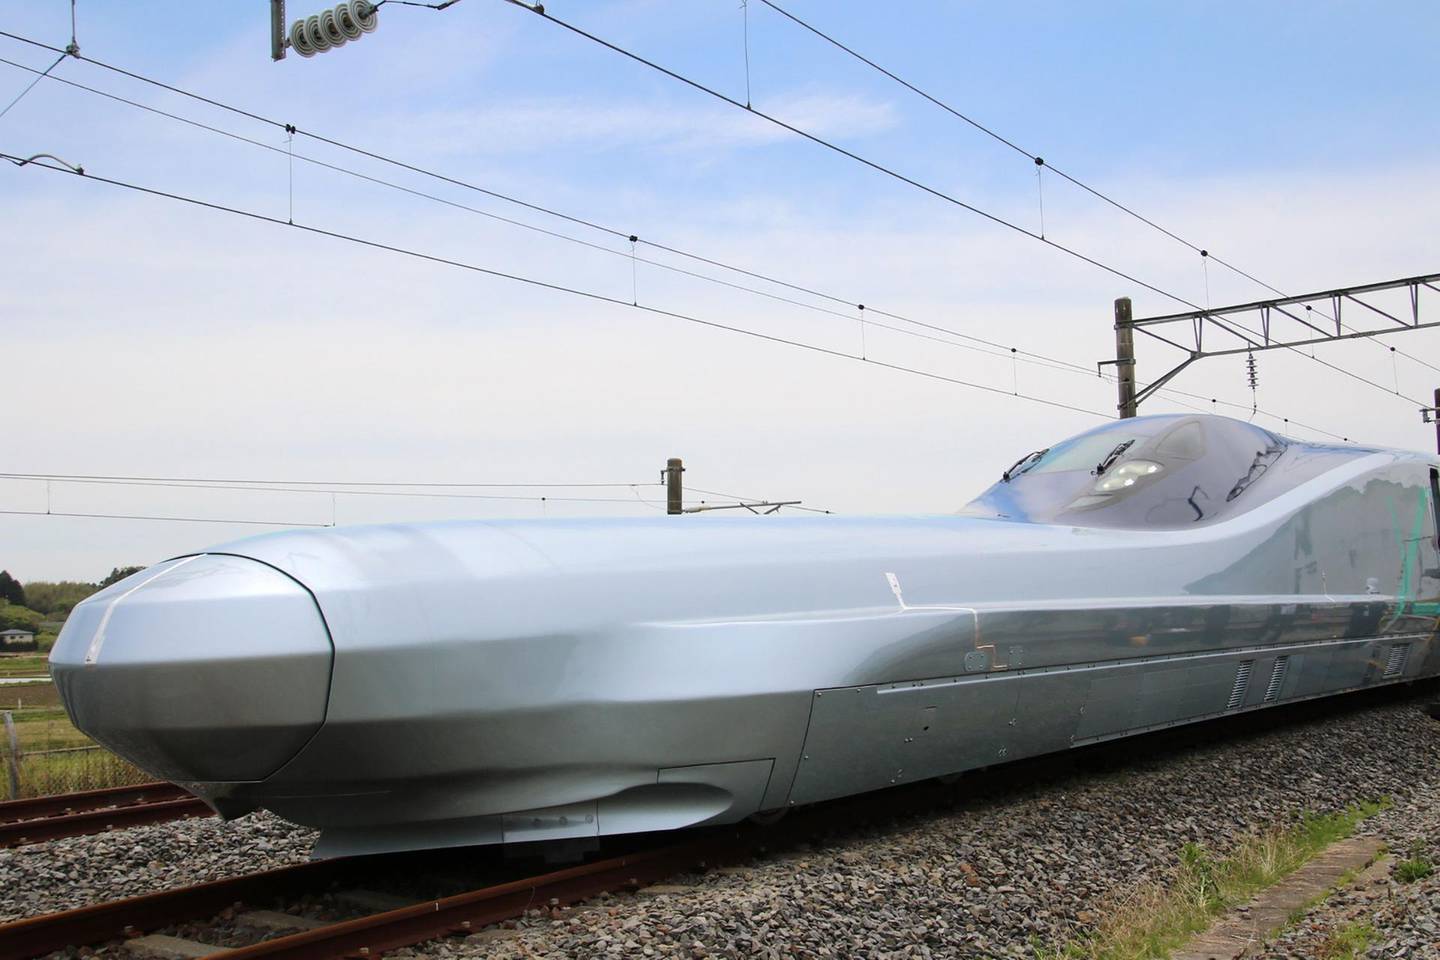 (FILES) In this file photo taken on May 9, 2019, JR East's new test bullet train "ALFA-X" is seen in Rifu, Miyagi prefecture. A prototype of Japan's next-generation Shinkansen bullet train, set to be the fastest train on wheels when it enters service, reached speeds of 320 kilometres (198 miles) per hour on a test run on May 16. The train, code-named ALFA-X, will eventually hit 360 kilometres per hour when it begins to take passengers in about a decade, according to East Japan Railway. - Japan OUT
 / AFP / JIJI PRESS / JIJI PRESS
